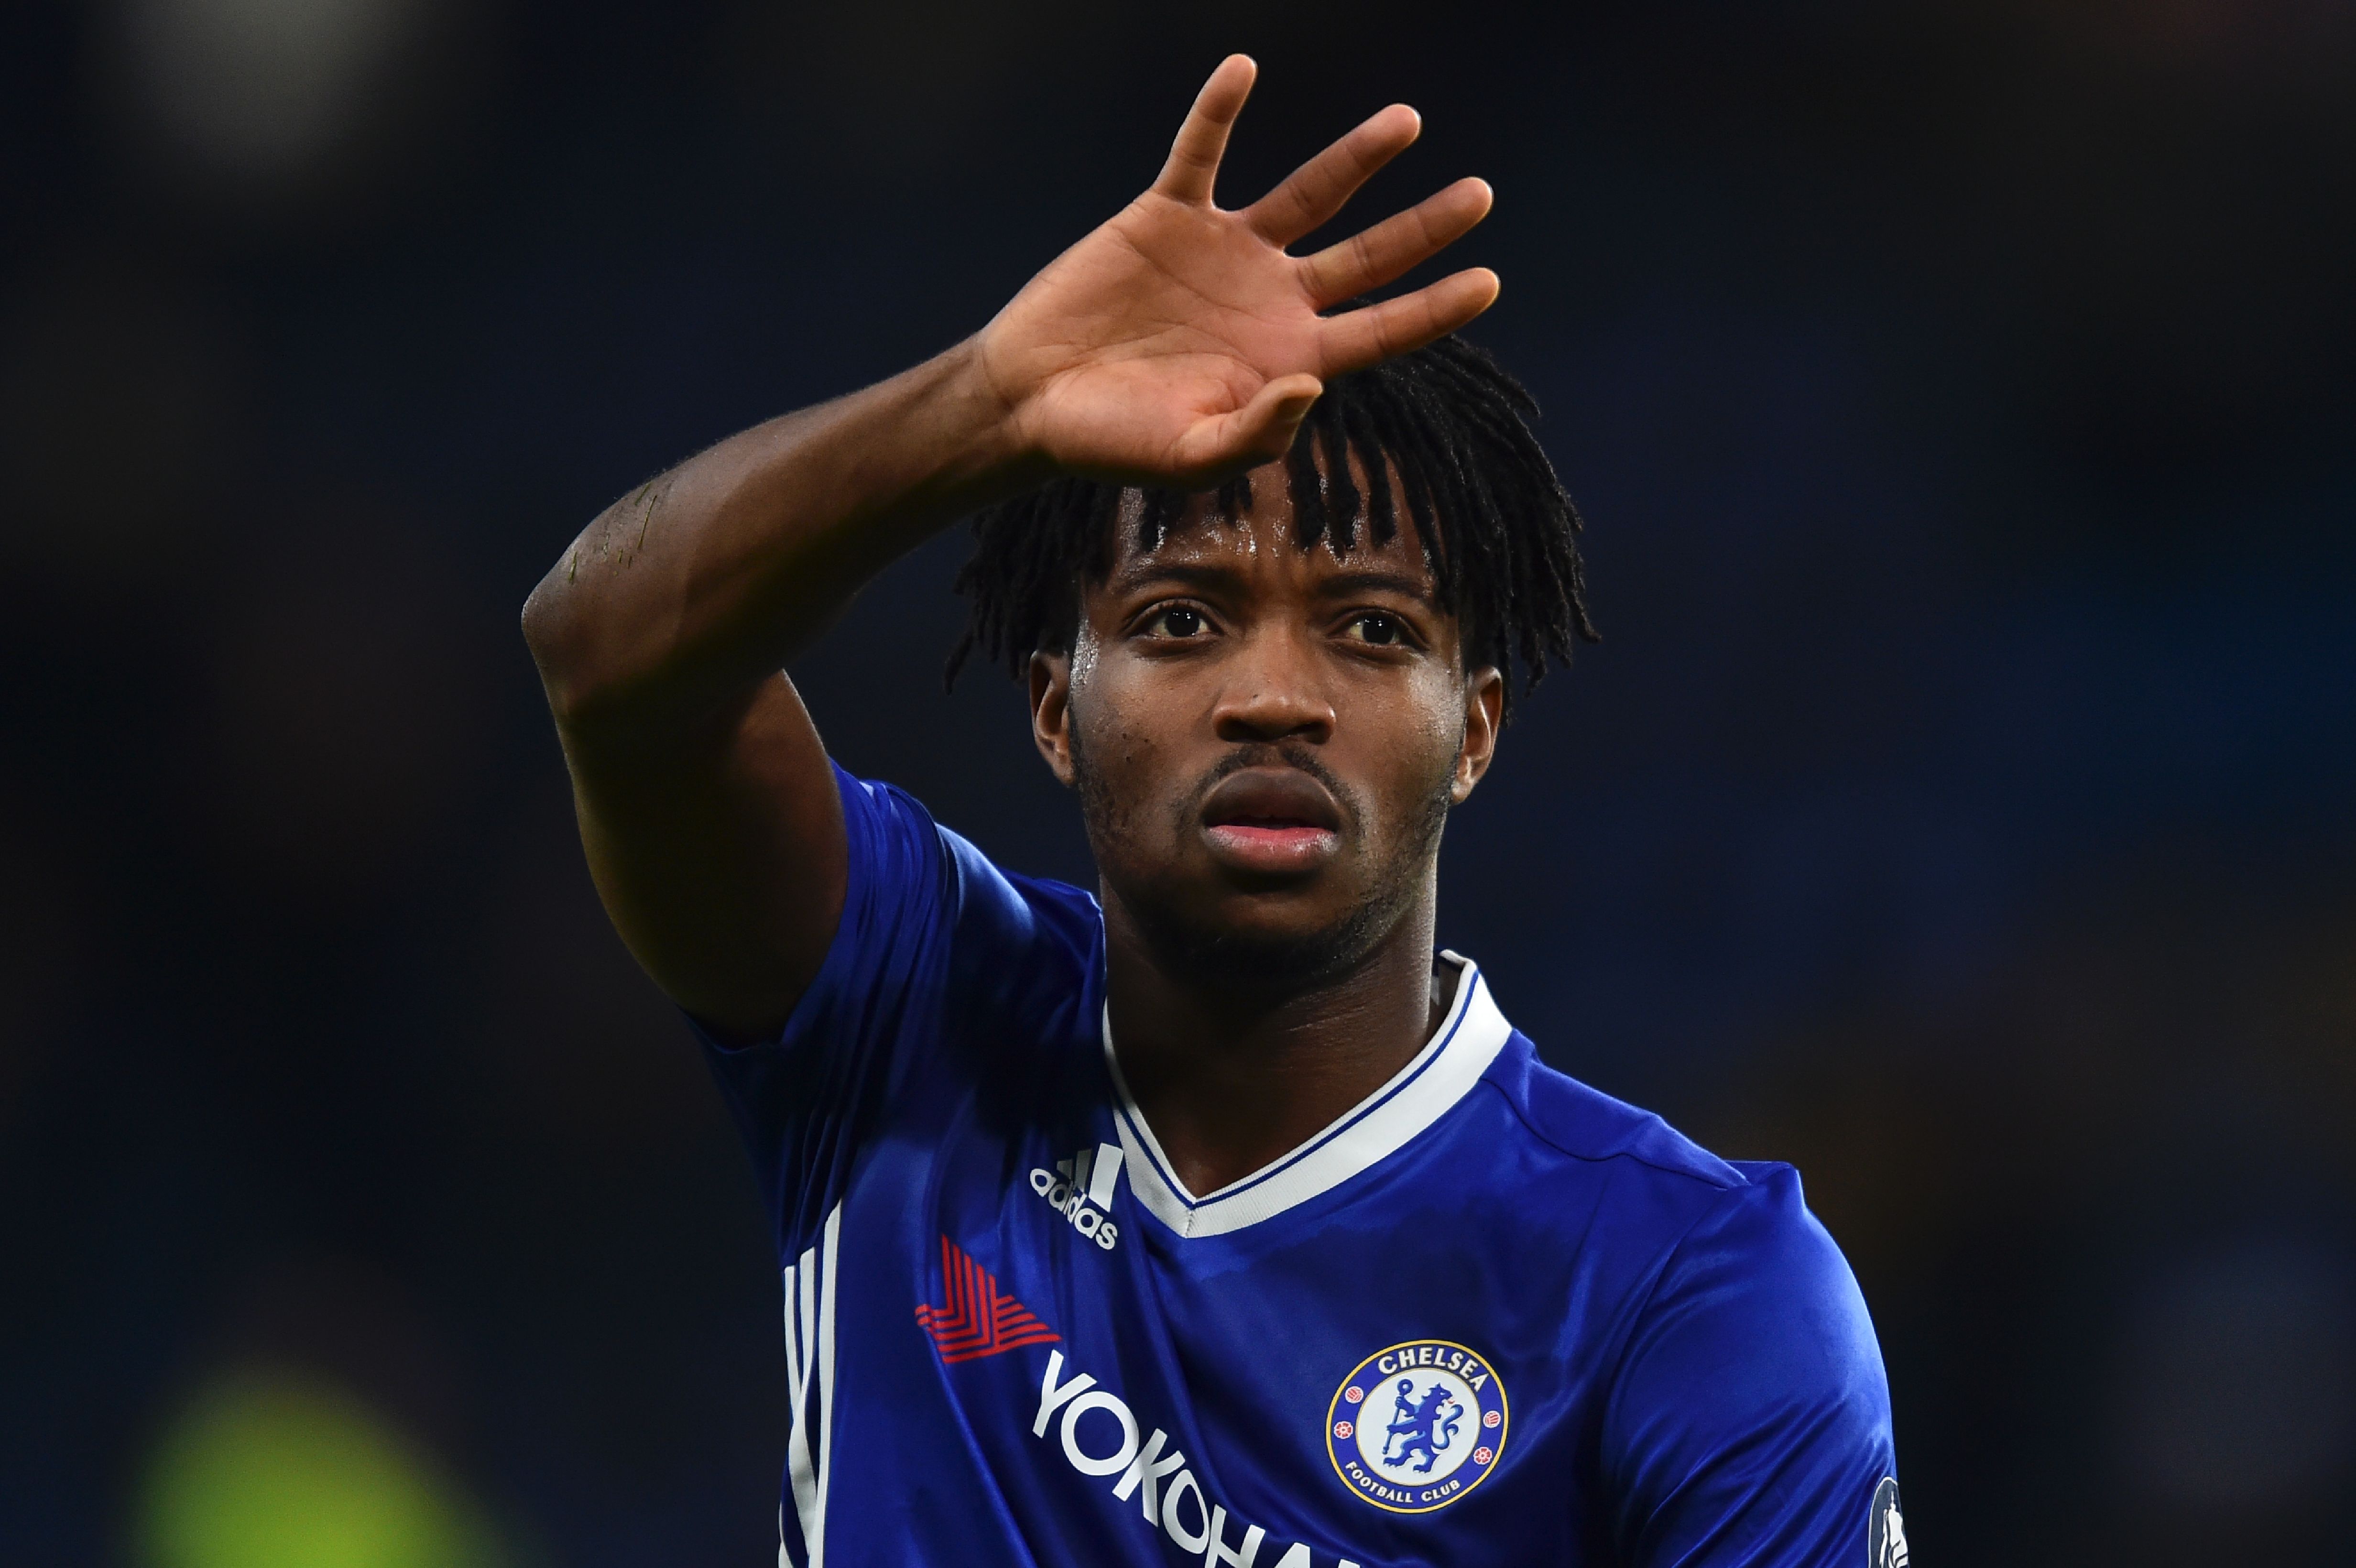 Chelsea's Nathaniel Chalobah waves at the crowd at the end of the English FA Cup fourth round football match between Chelsea and Brentford at Stamford Bridge in London on January 28, 2017. / AFP / Glyn KIRK / RESTRICTED TO EDITORIAL USE. No use with unauthorized audio, video, data, fixture lists, club/league logos or 'live' services. Online in-match use limited to 75 images, no video emulation. No use in betting, games or single club/league/player publications.  /         (Photo credit should read GLYN KIRK/AFP/Getty Images)